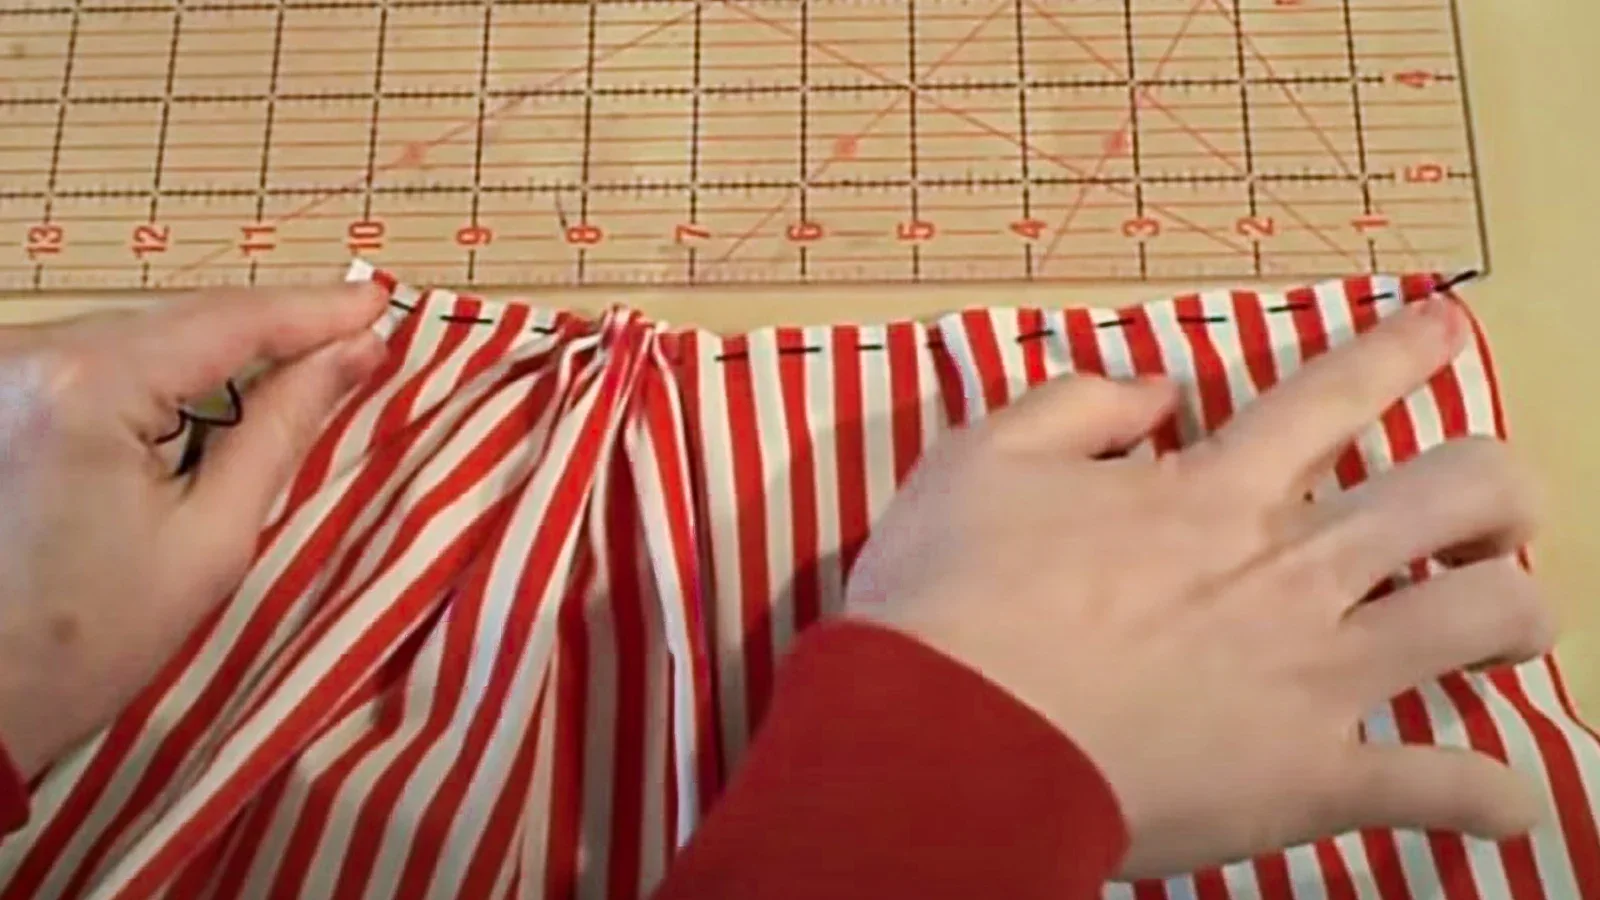 A person cutting a red and white striped skirt.